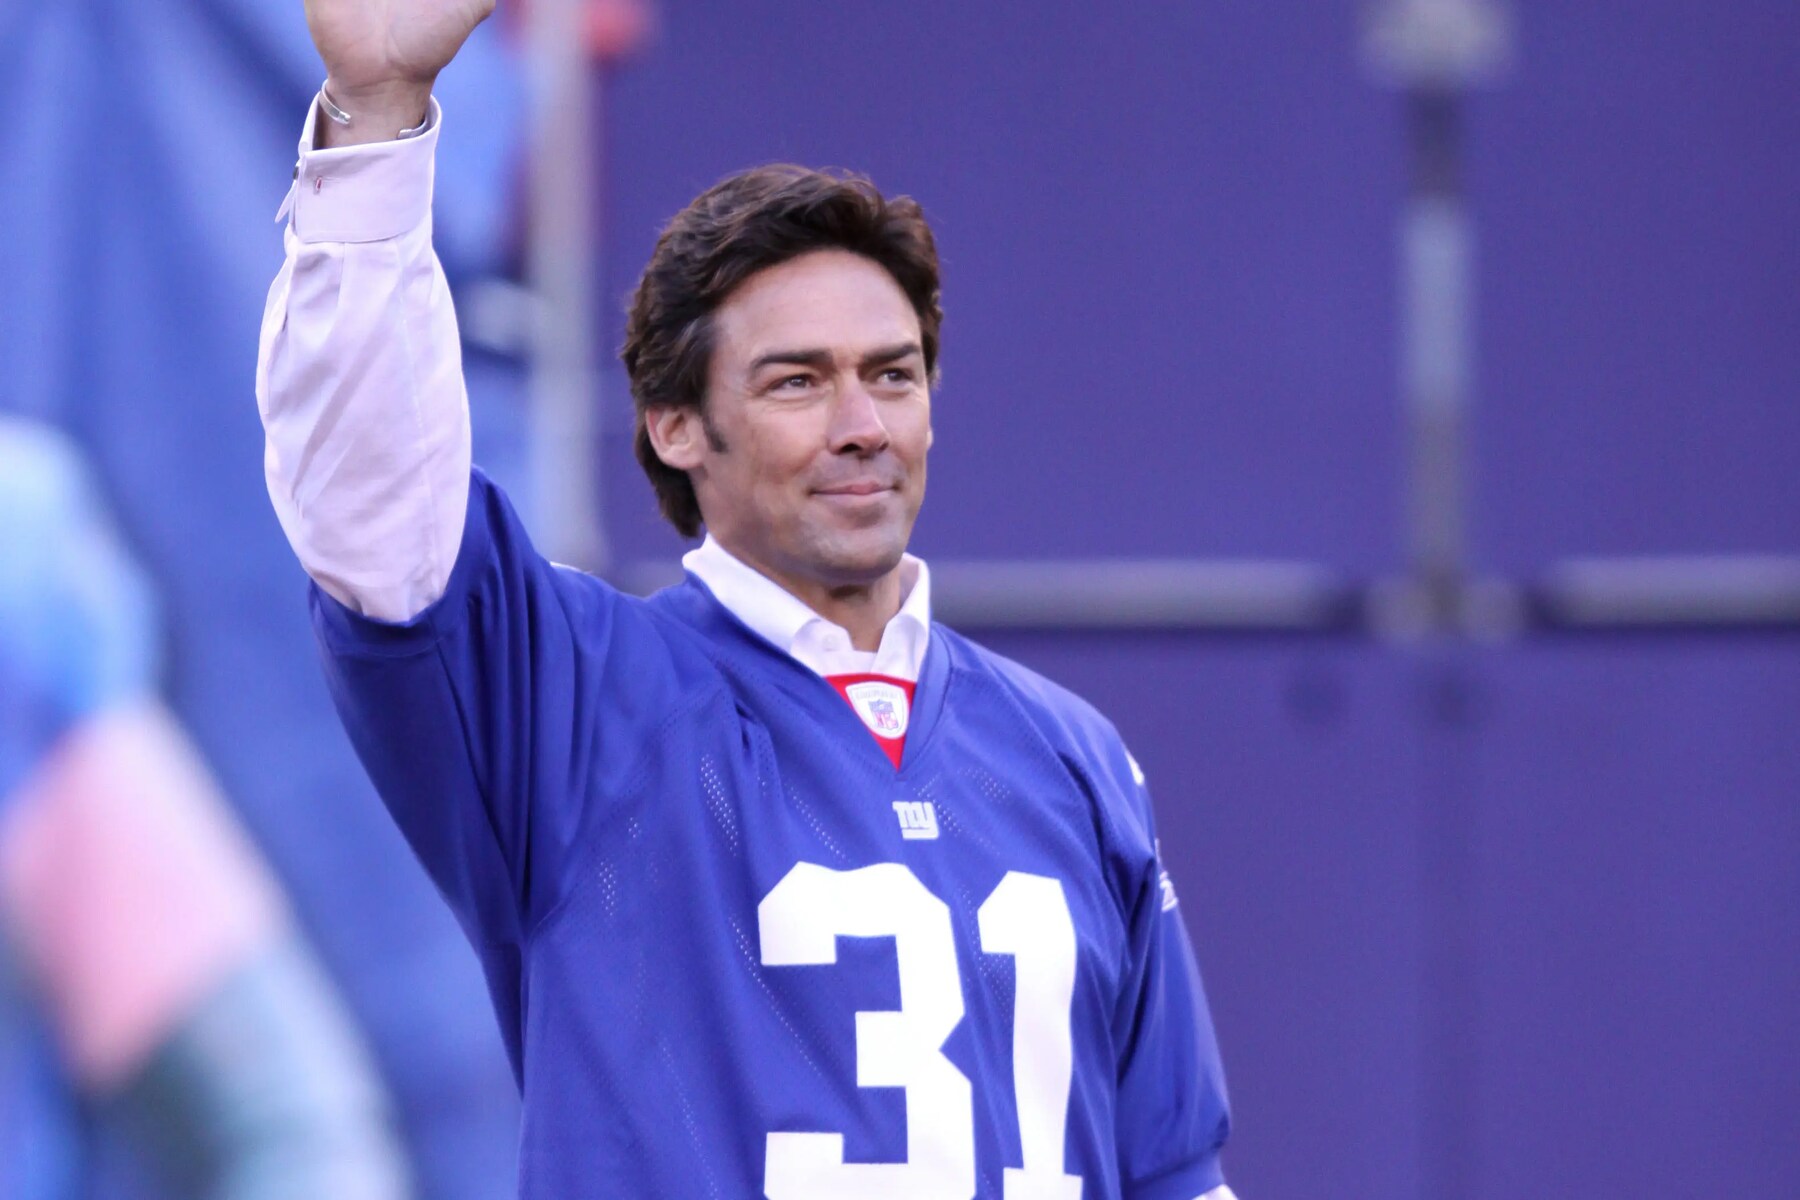 17 Enigmatic Facts About Jason Sehorn - Facts.net